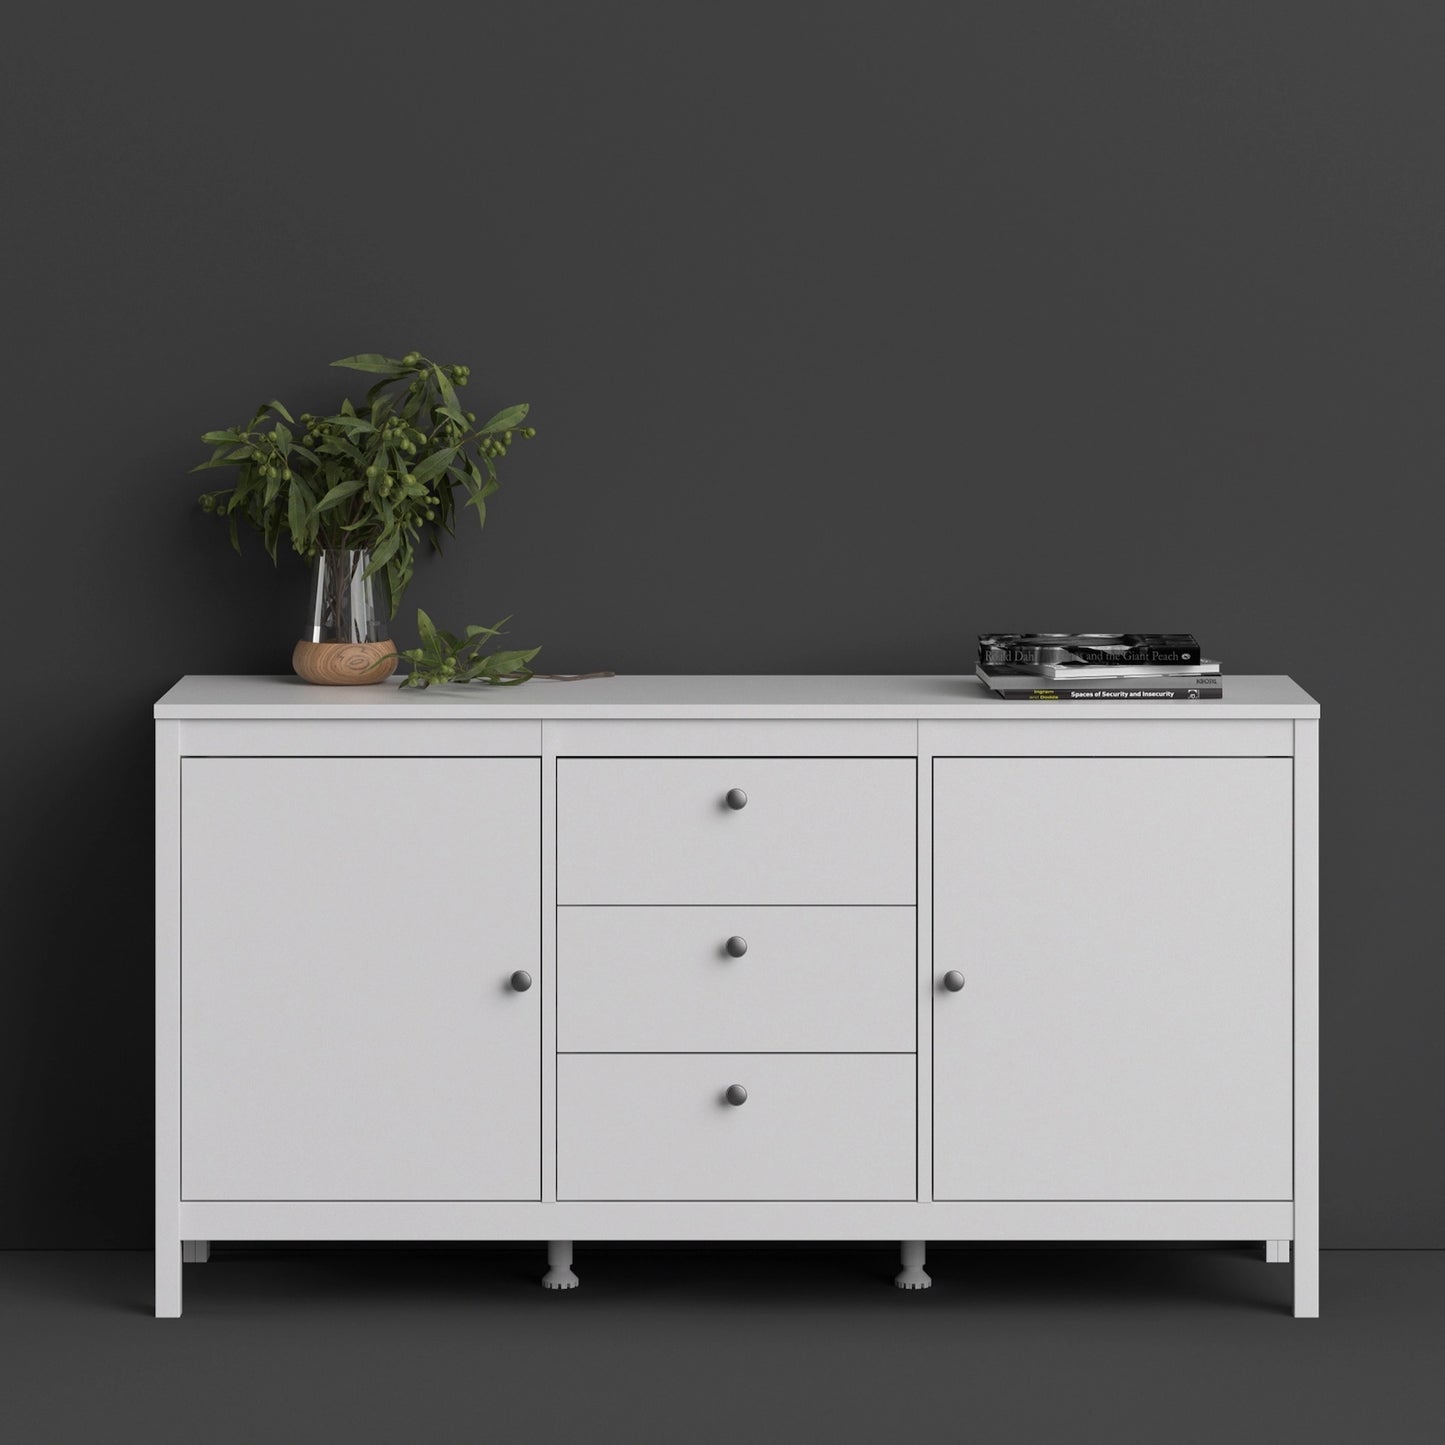 Furniture To Go Madrid Sideboard 2 Doors + 3 Drawers in White